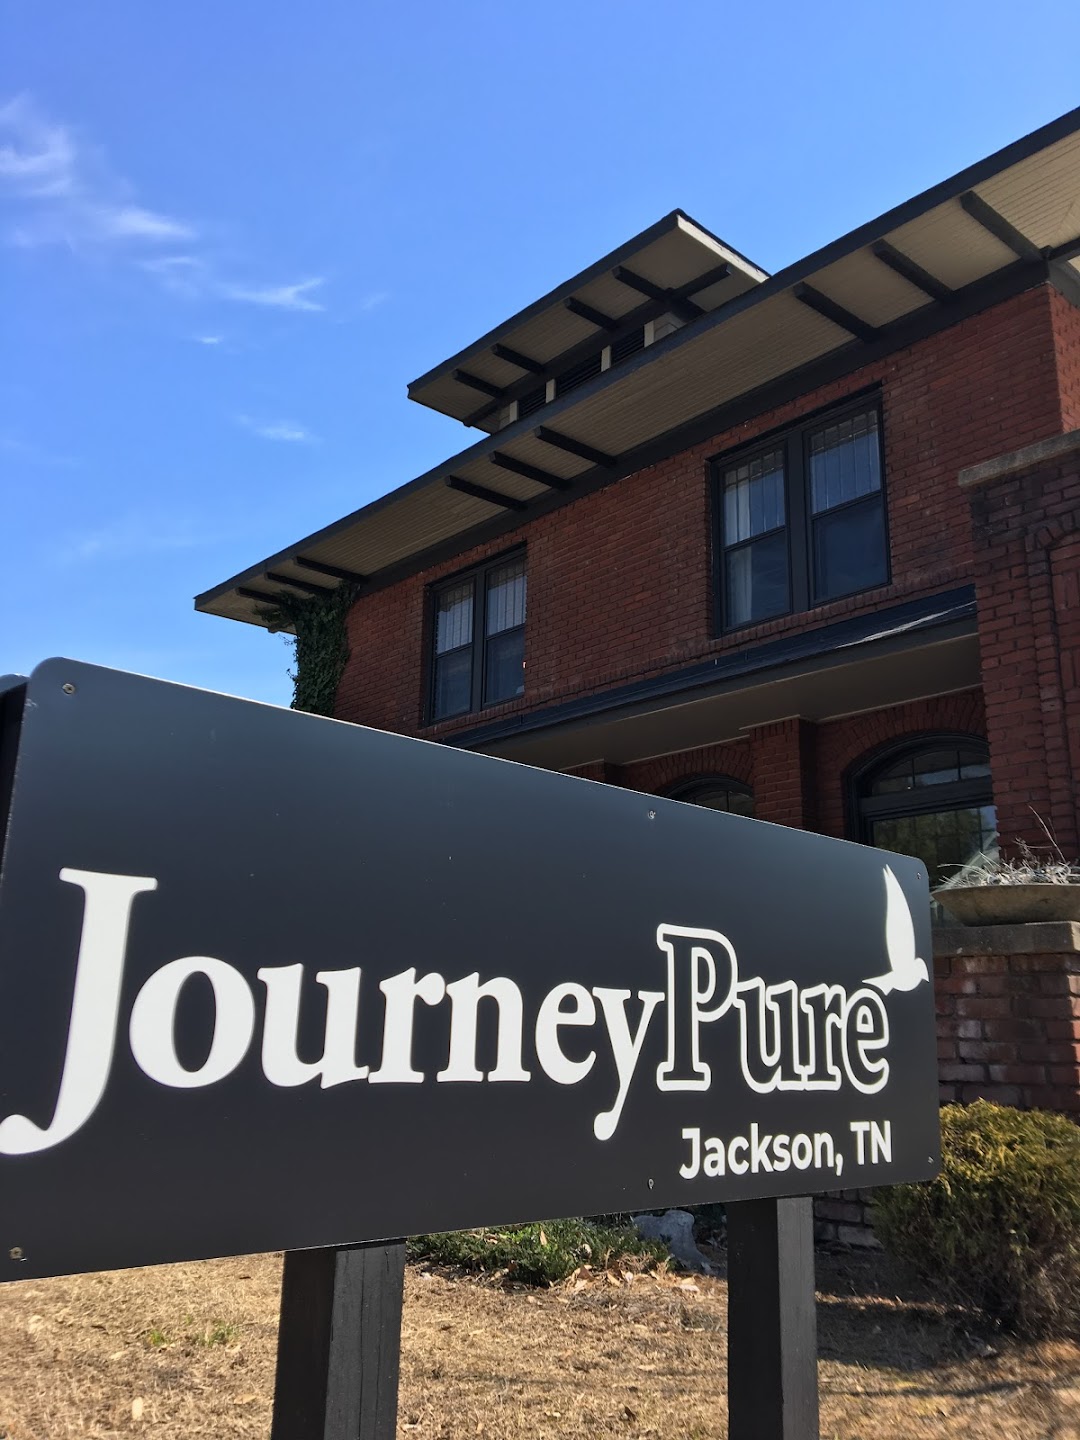 JourneyPure - Your 1 Choice for Drug Rehab, Alcohol Treatment in Jackson